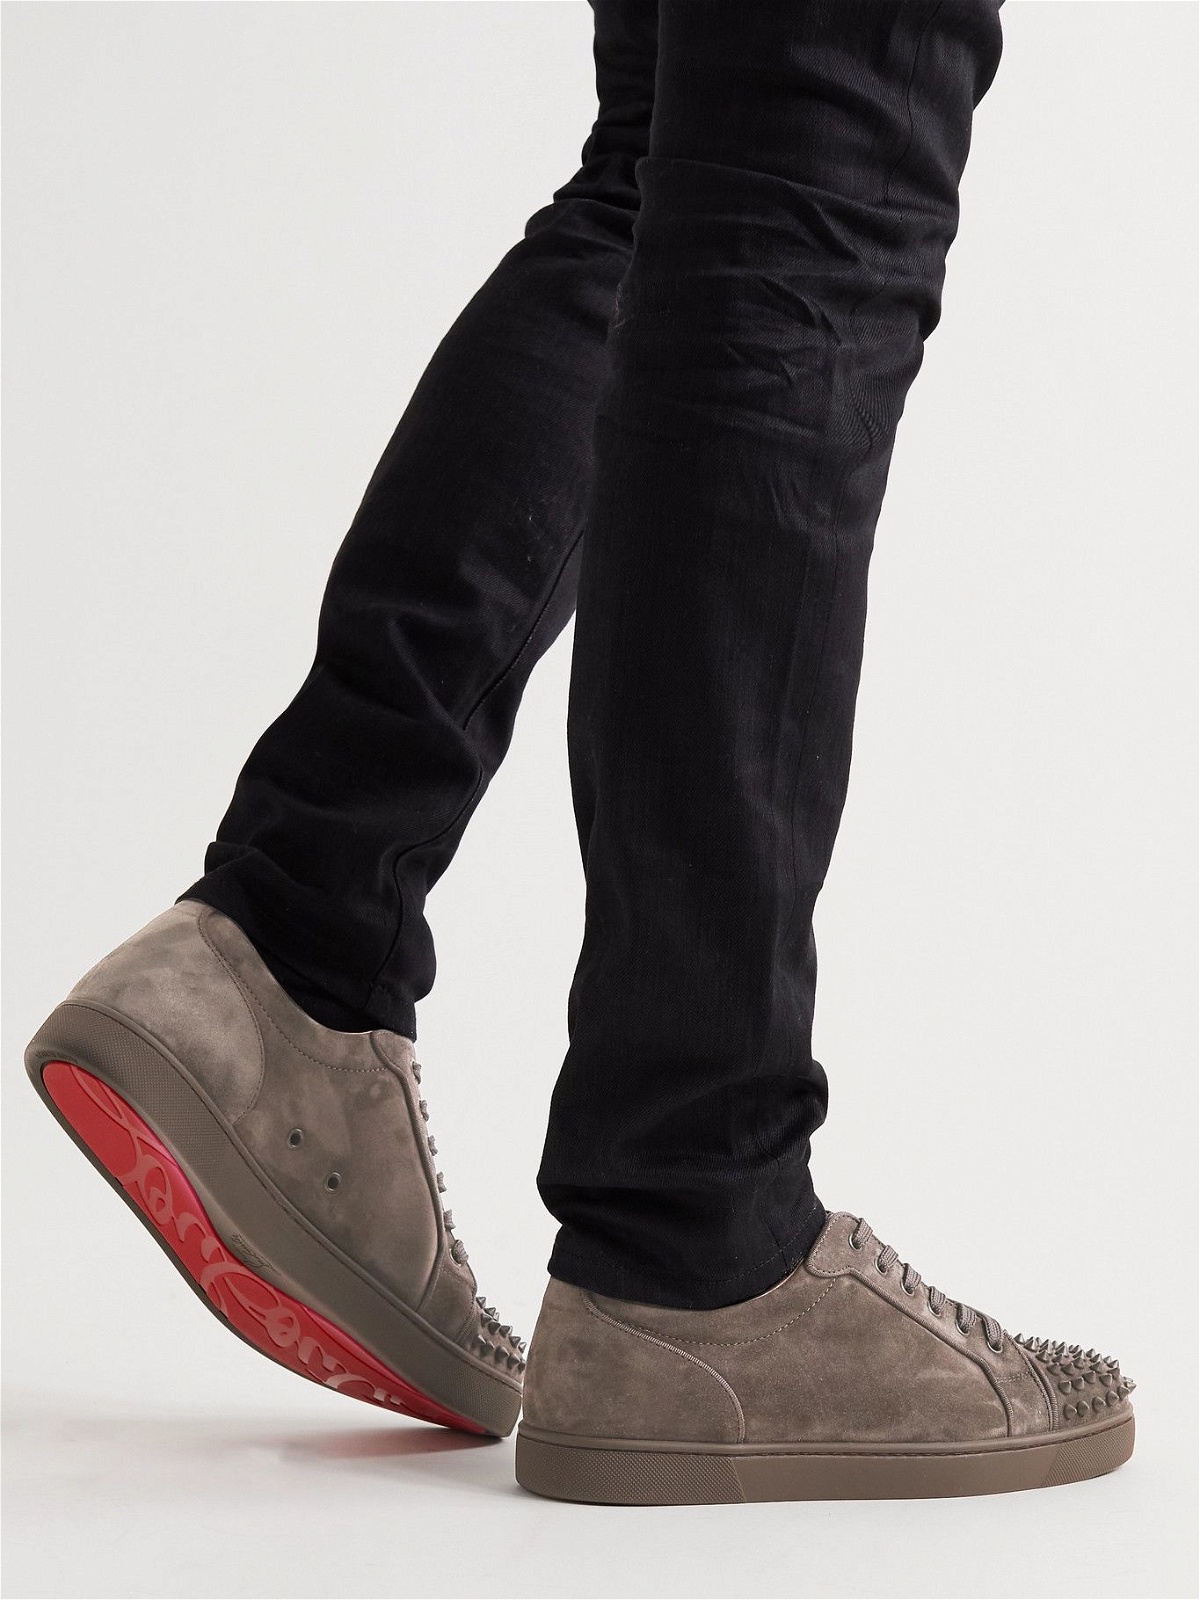 Christian Louboutin Louis Junior Spiked Suede Sneakers in Gray for